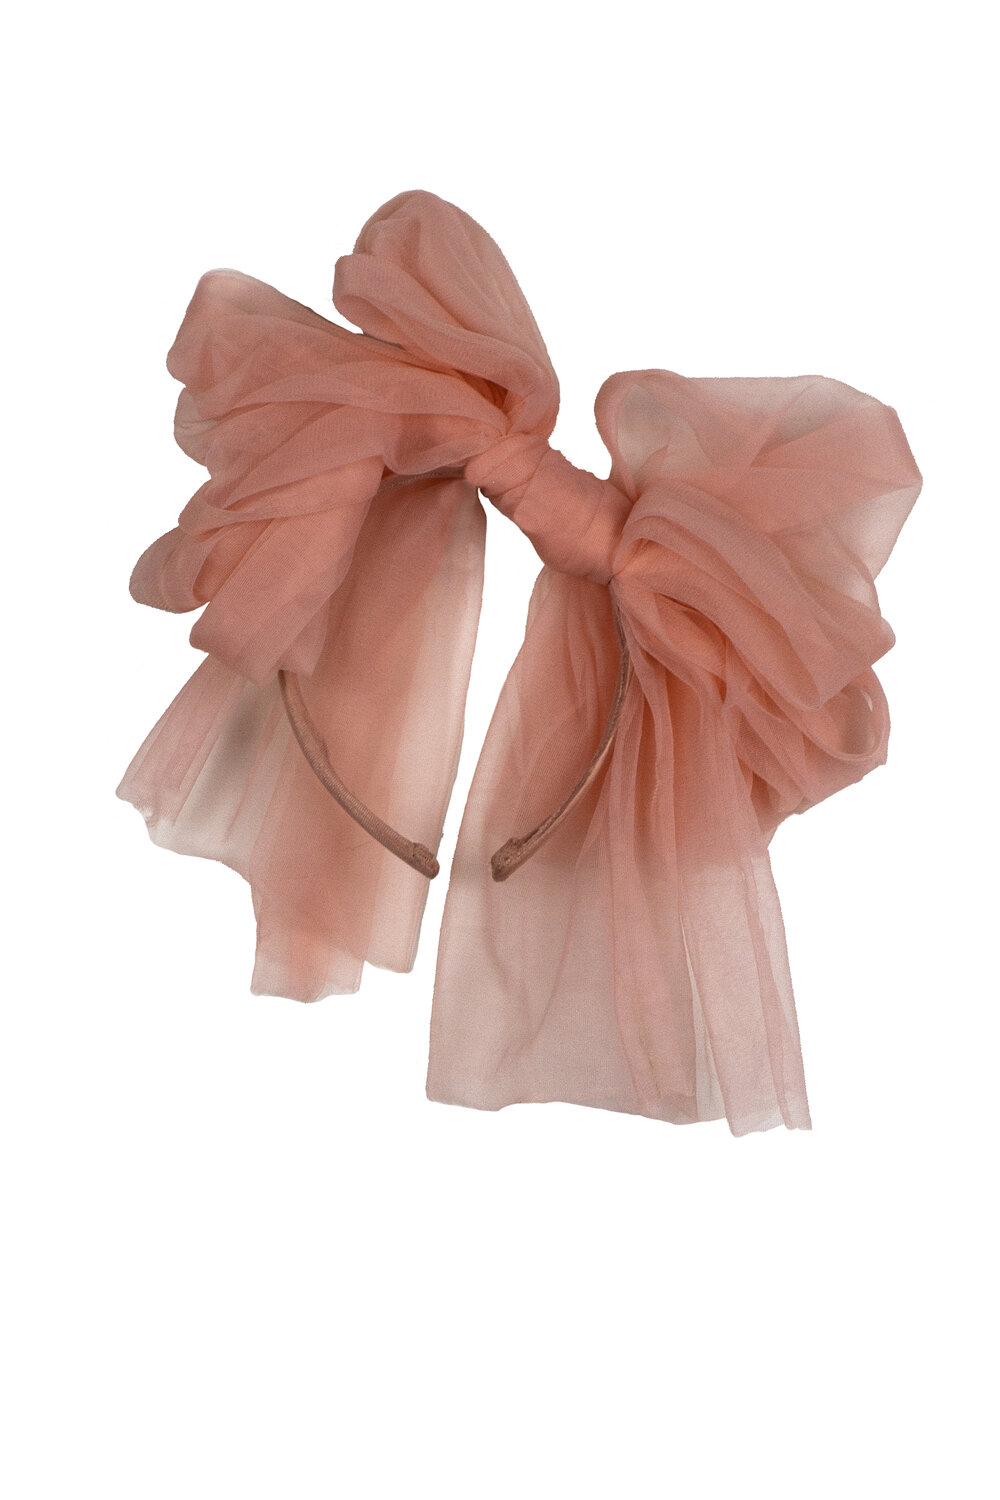 KELSEY RANDALL - shop all collections - MADE TO ORDER - NIXIE pink mesh  tulle bow headband